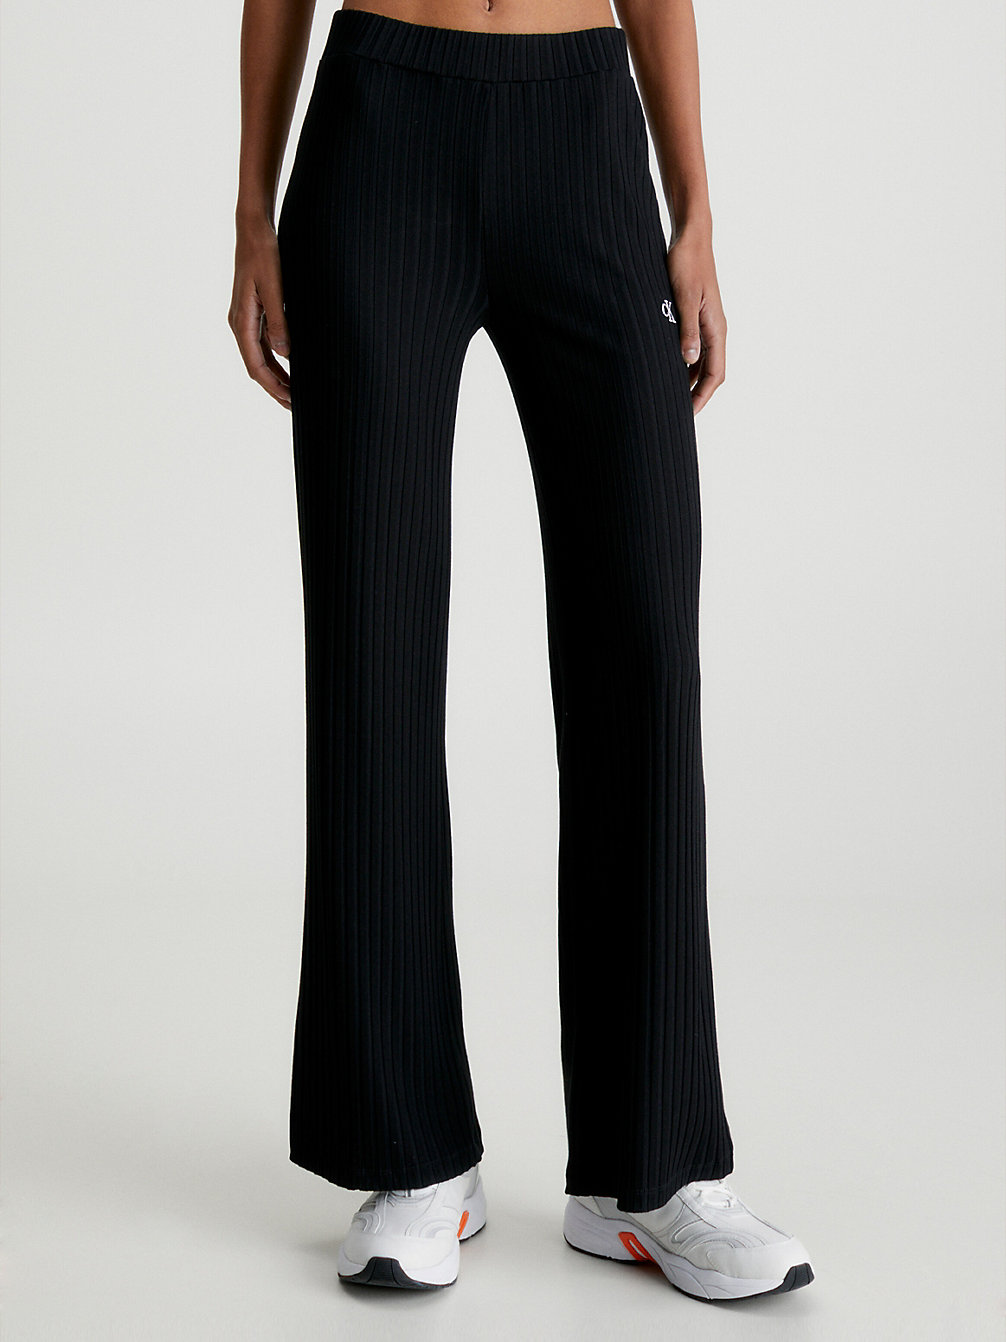 CK BLACK > Ribbed Jersey Flared Trousers > undefined Женщины - Calvin Klein